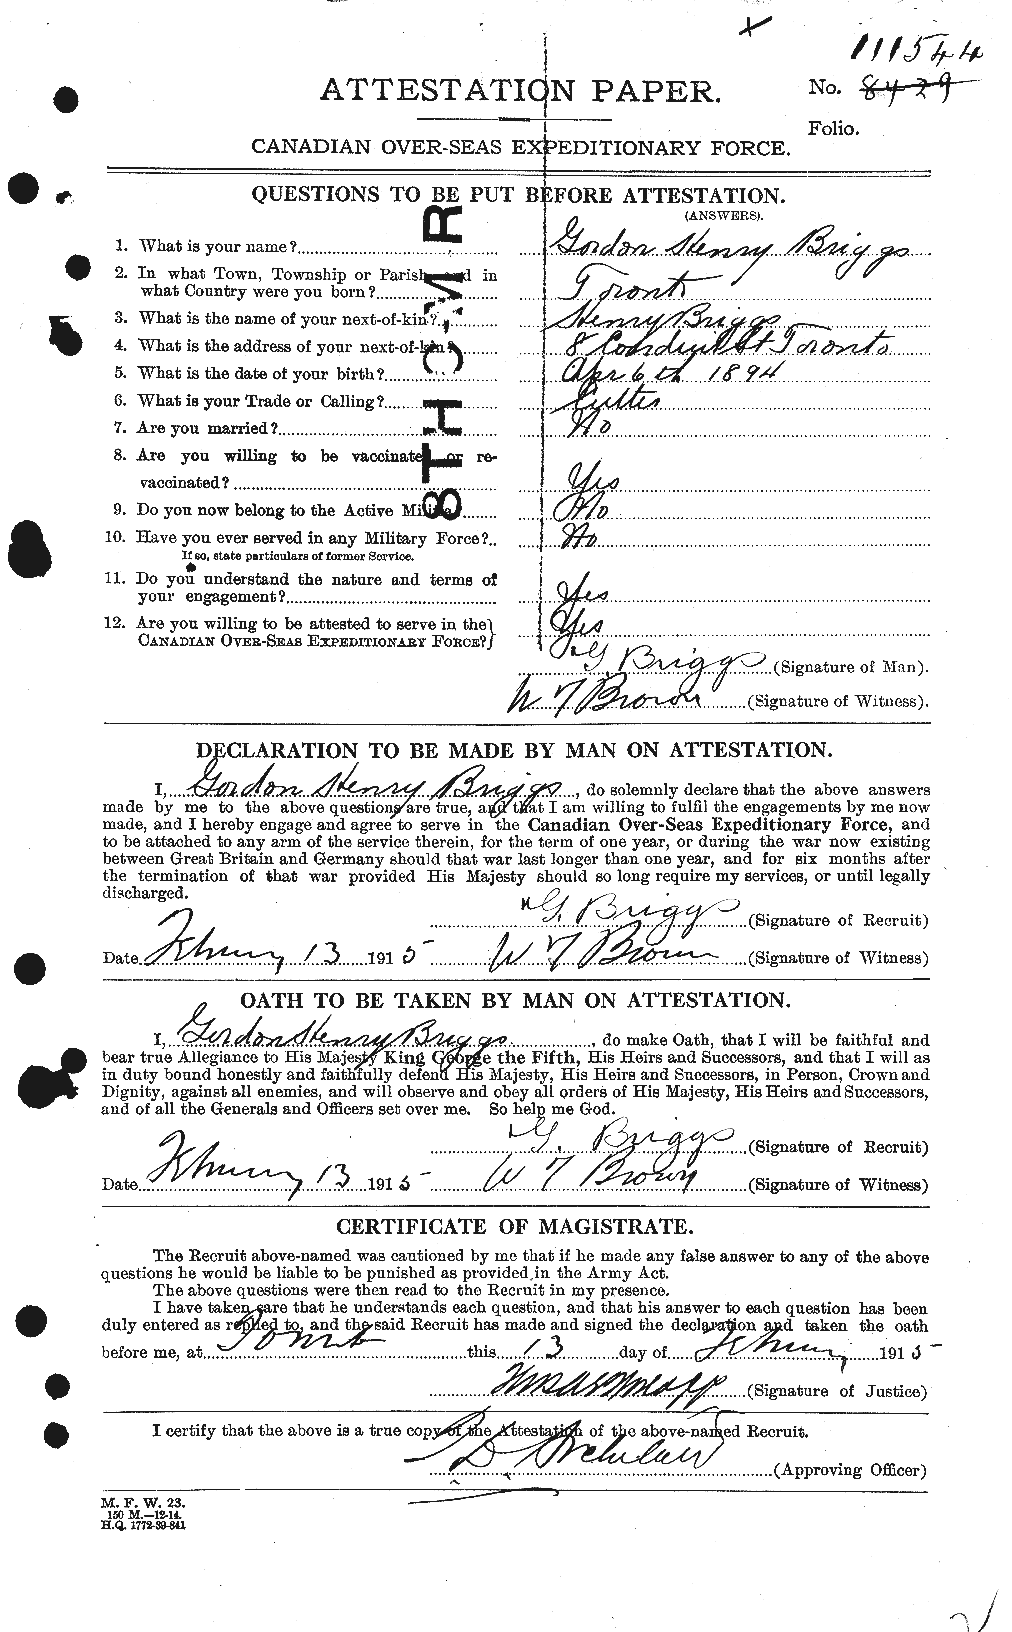 Personnel Records of the First World War - CEF 264022a